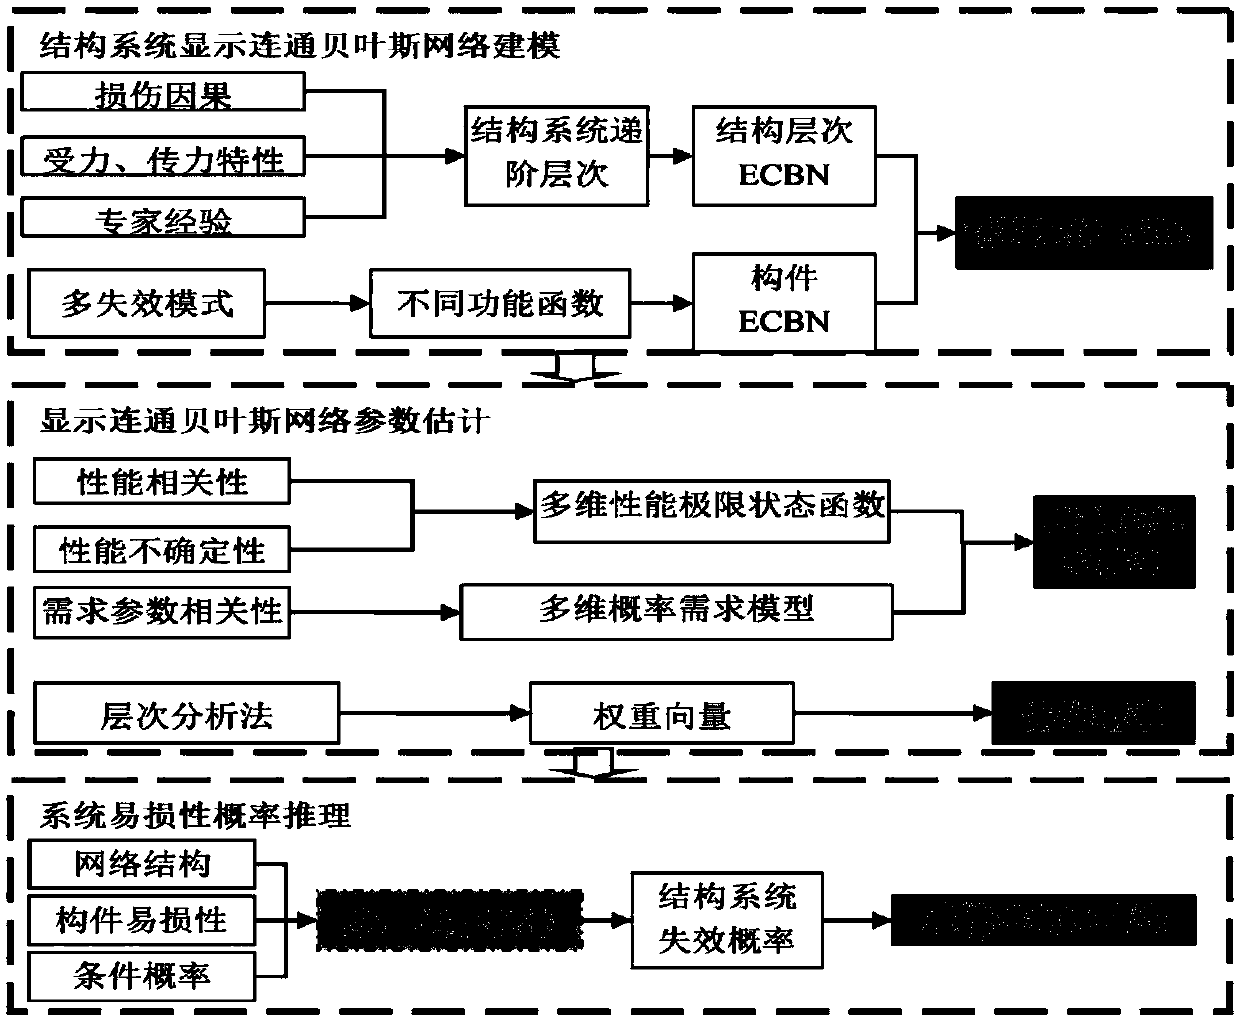 Structural system vulnerability evaluation method based on ECBN (Explicit Connectivity Bayesian Network)